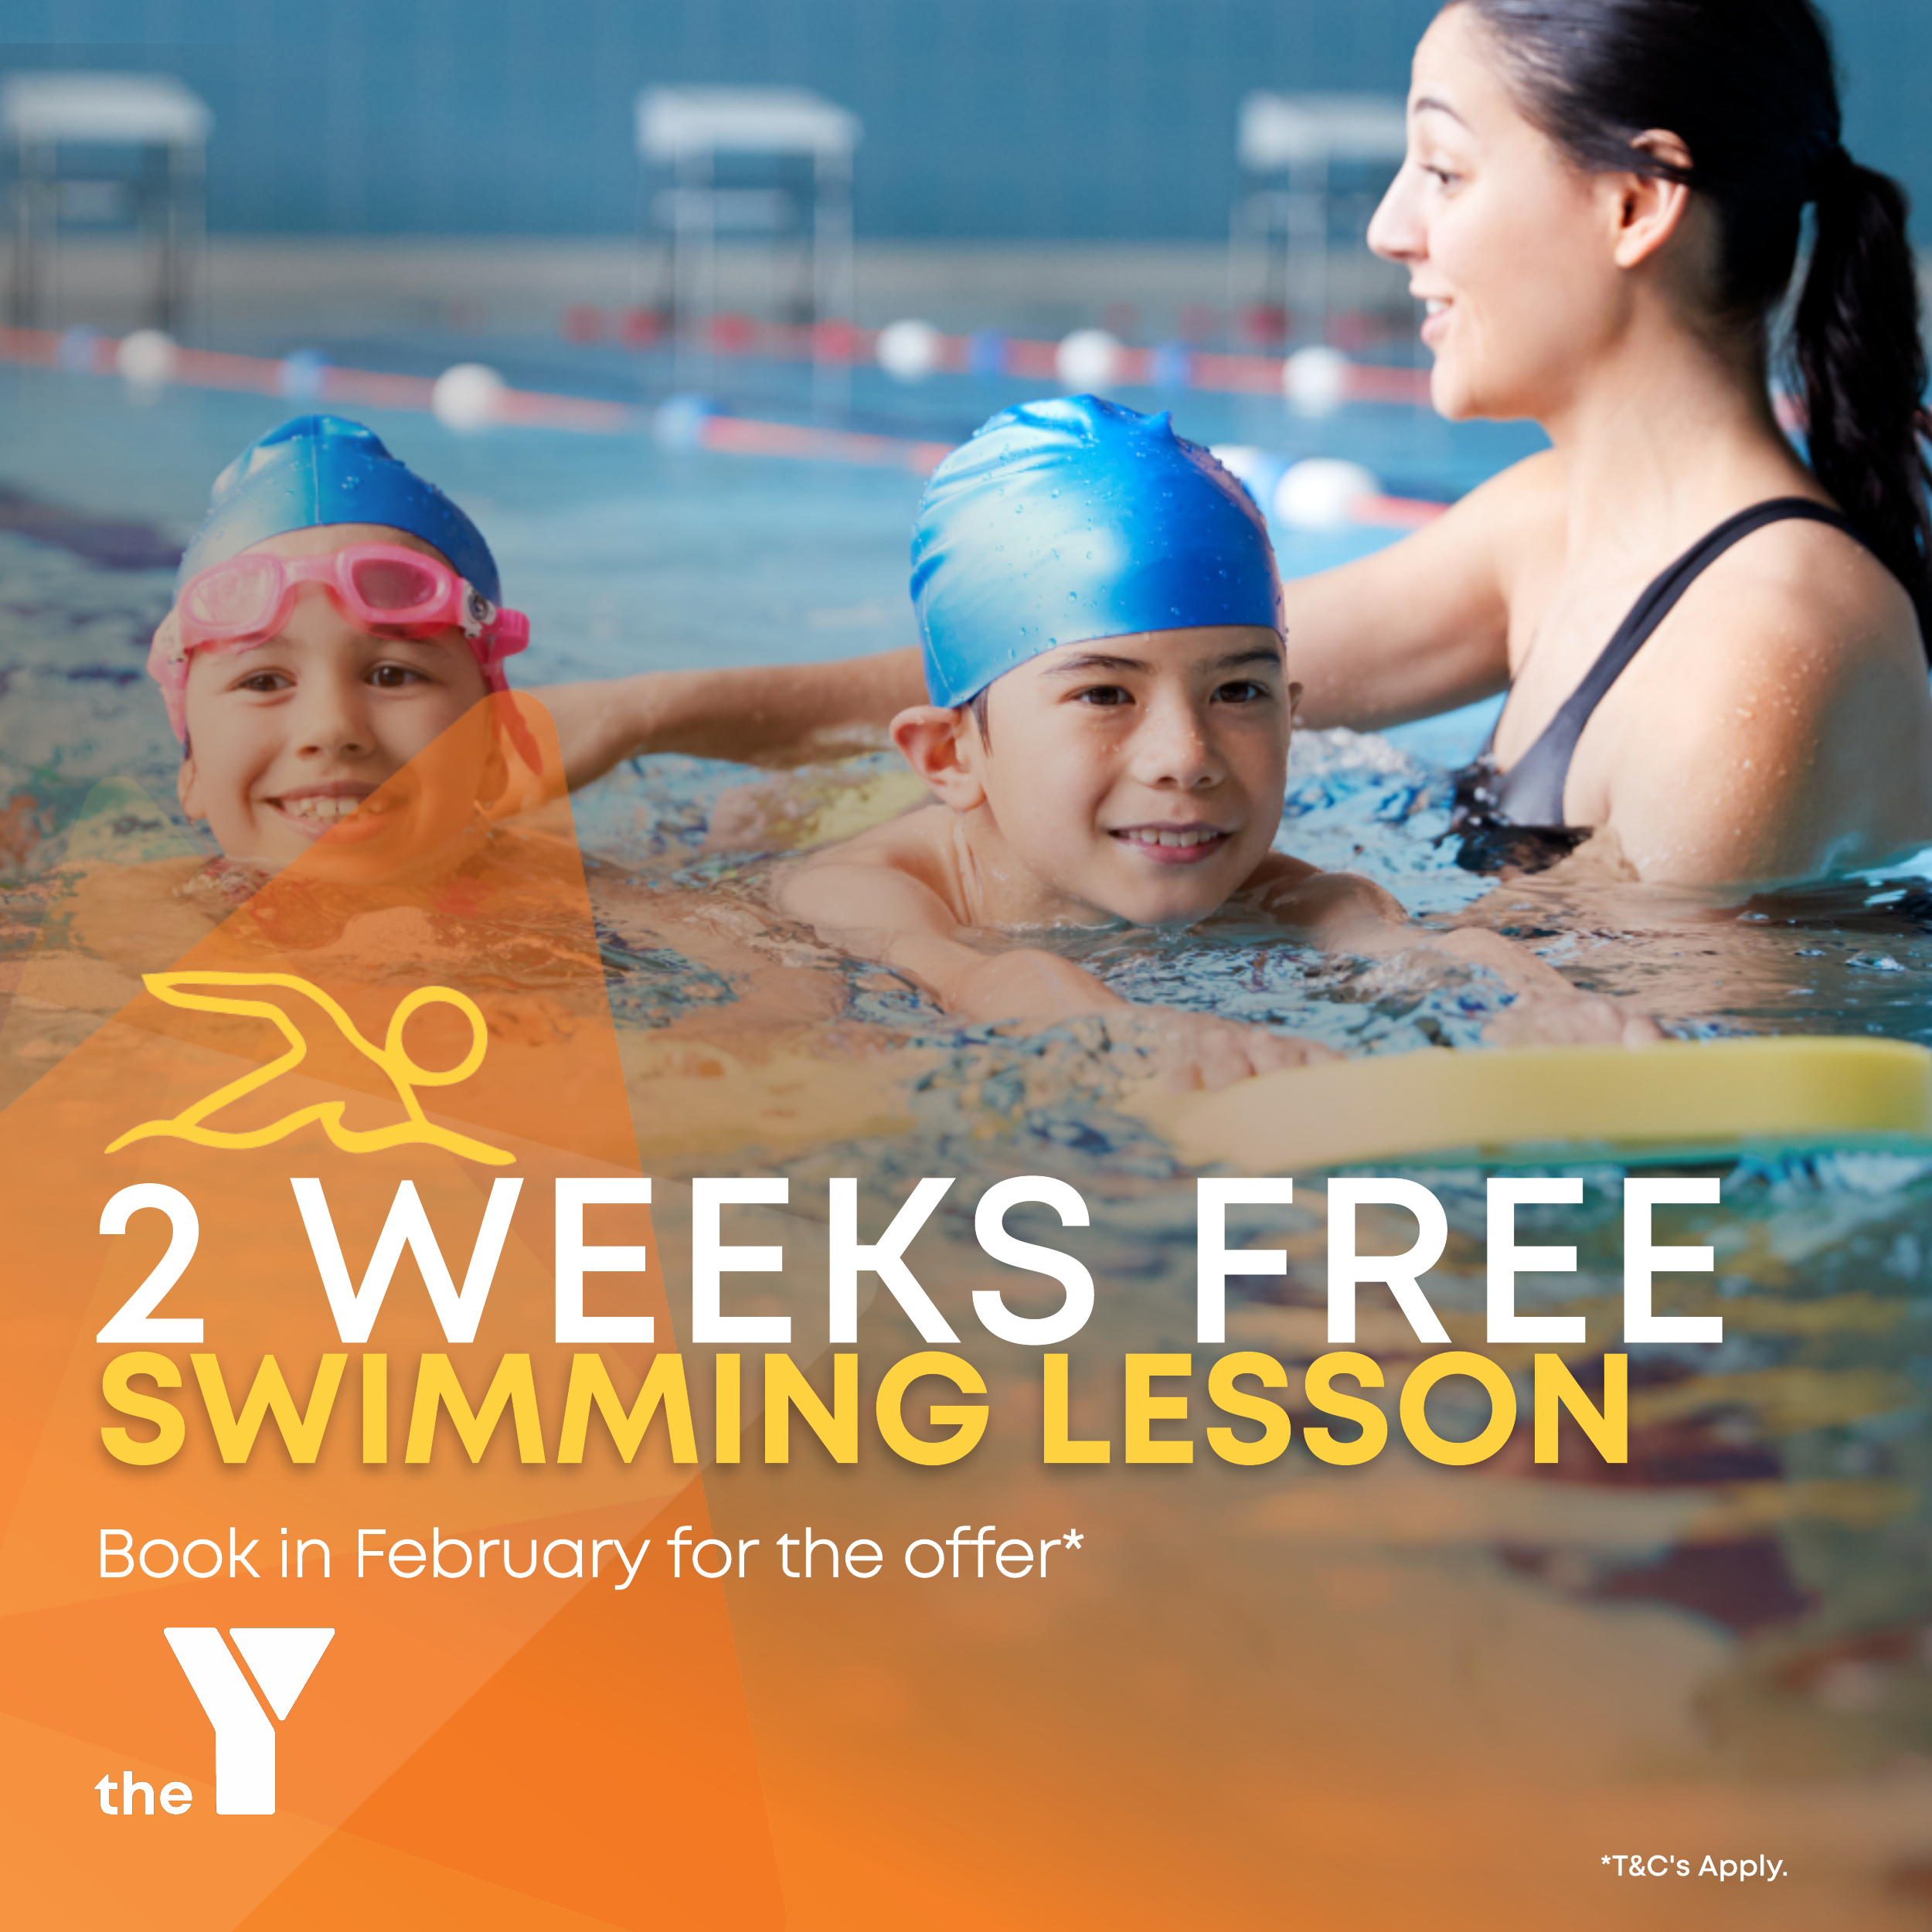 Swimming lesson offer